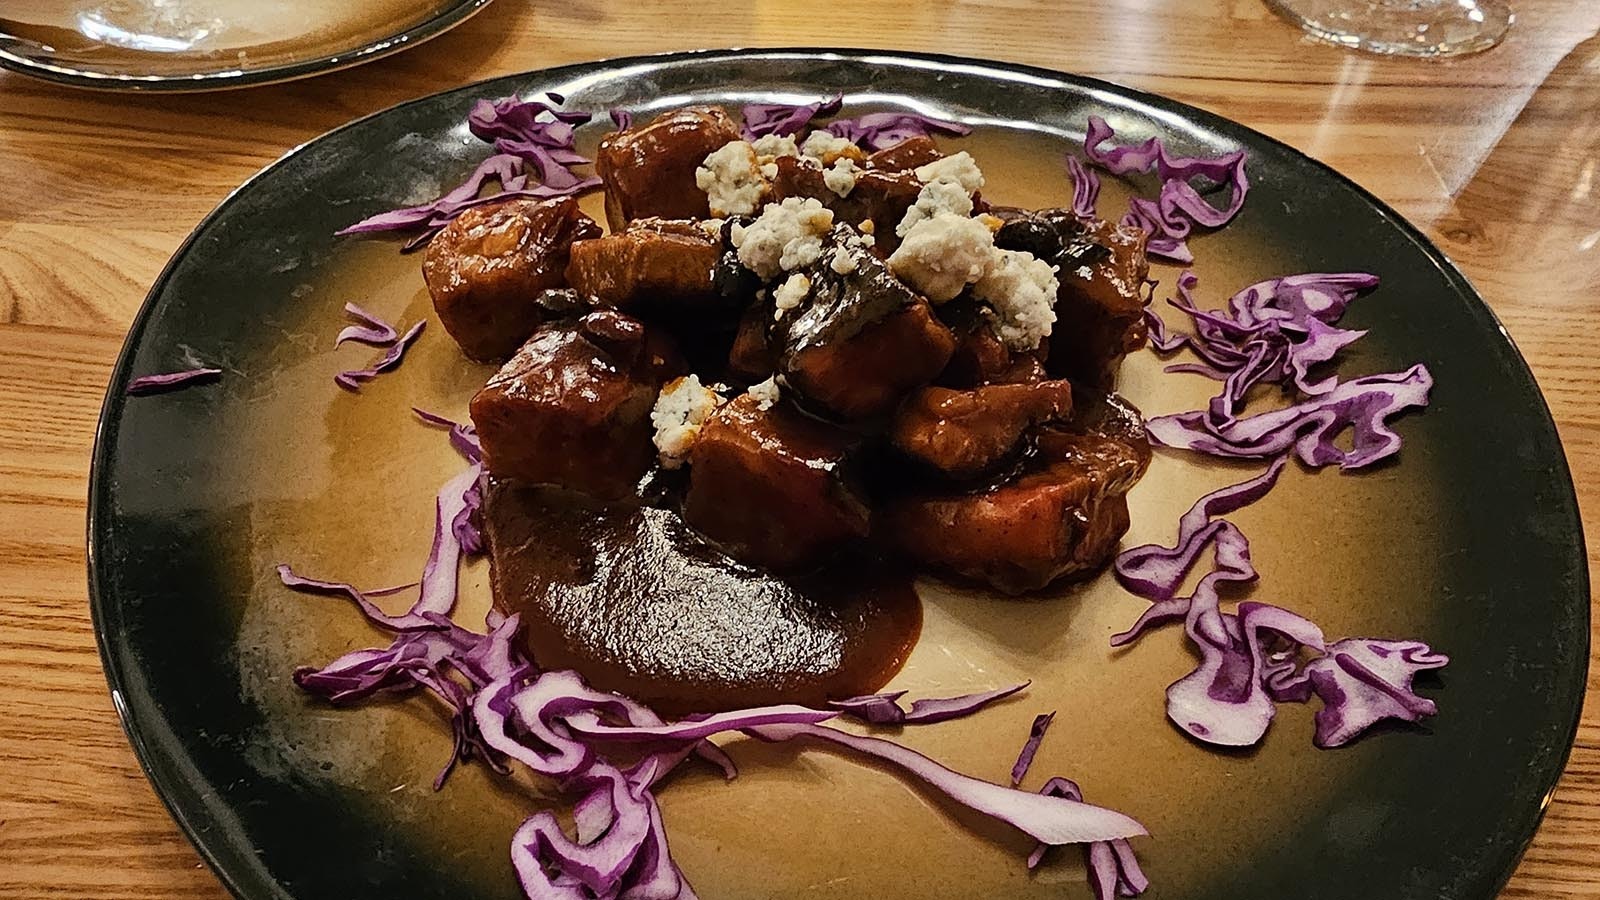 The burnt ends with blue cheese, one of the appetizers available at Stockman's Saloon and Steakhouse.